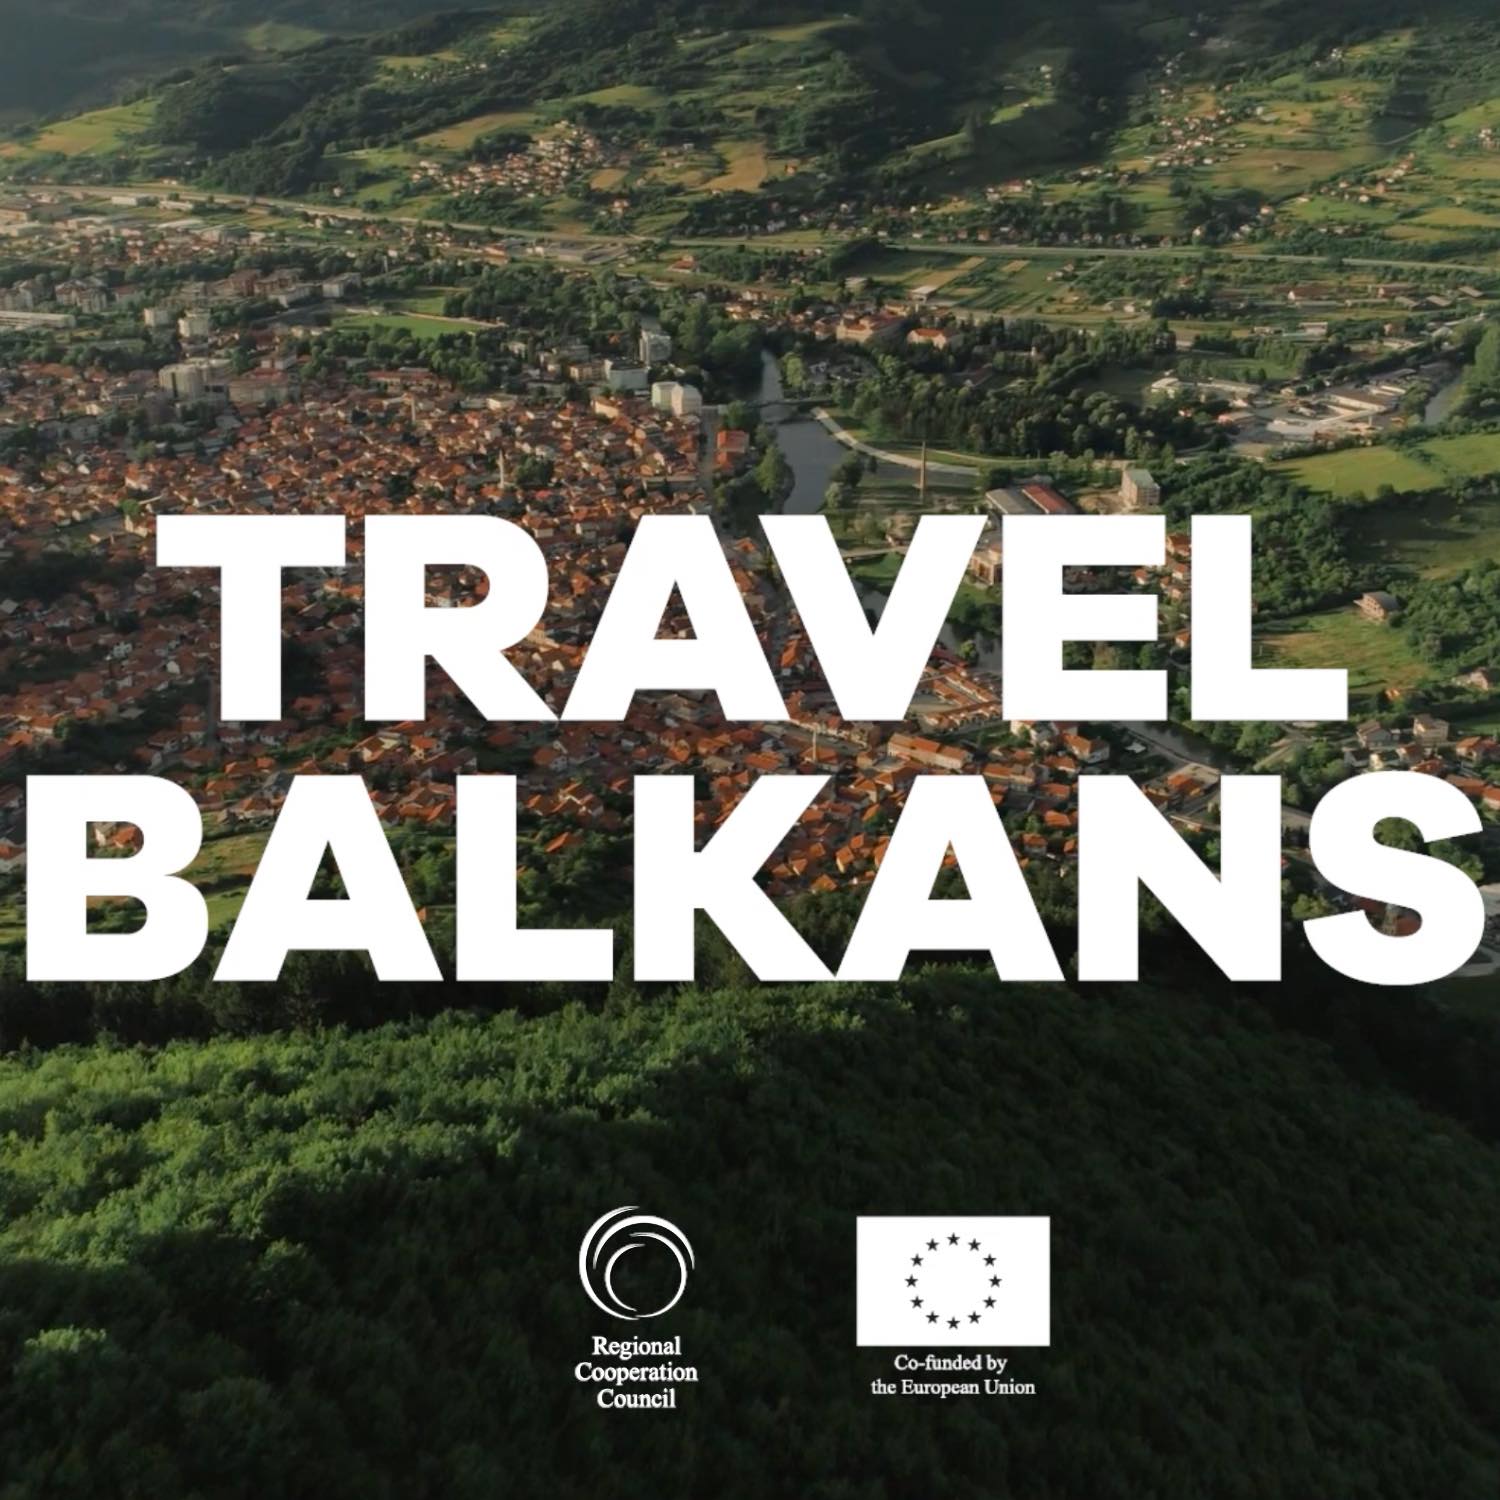 Travel Balkans: Traveling is much more than just visiting places and taking pictures